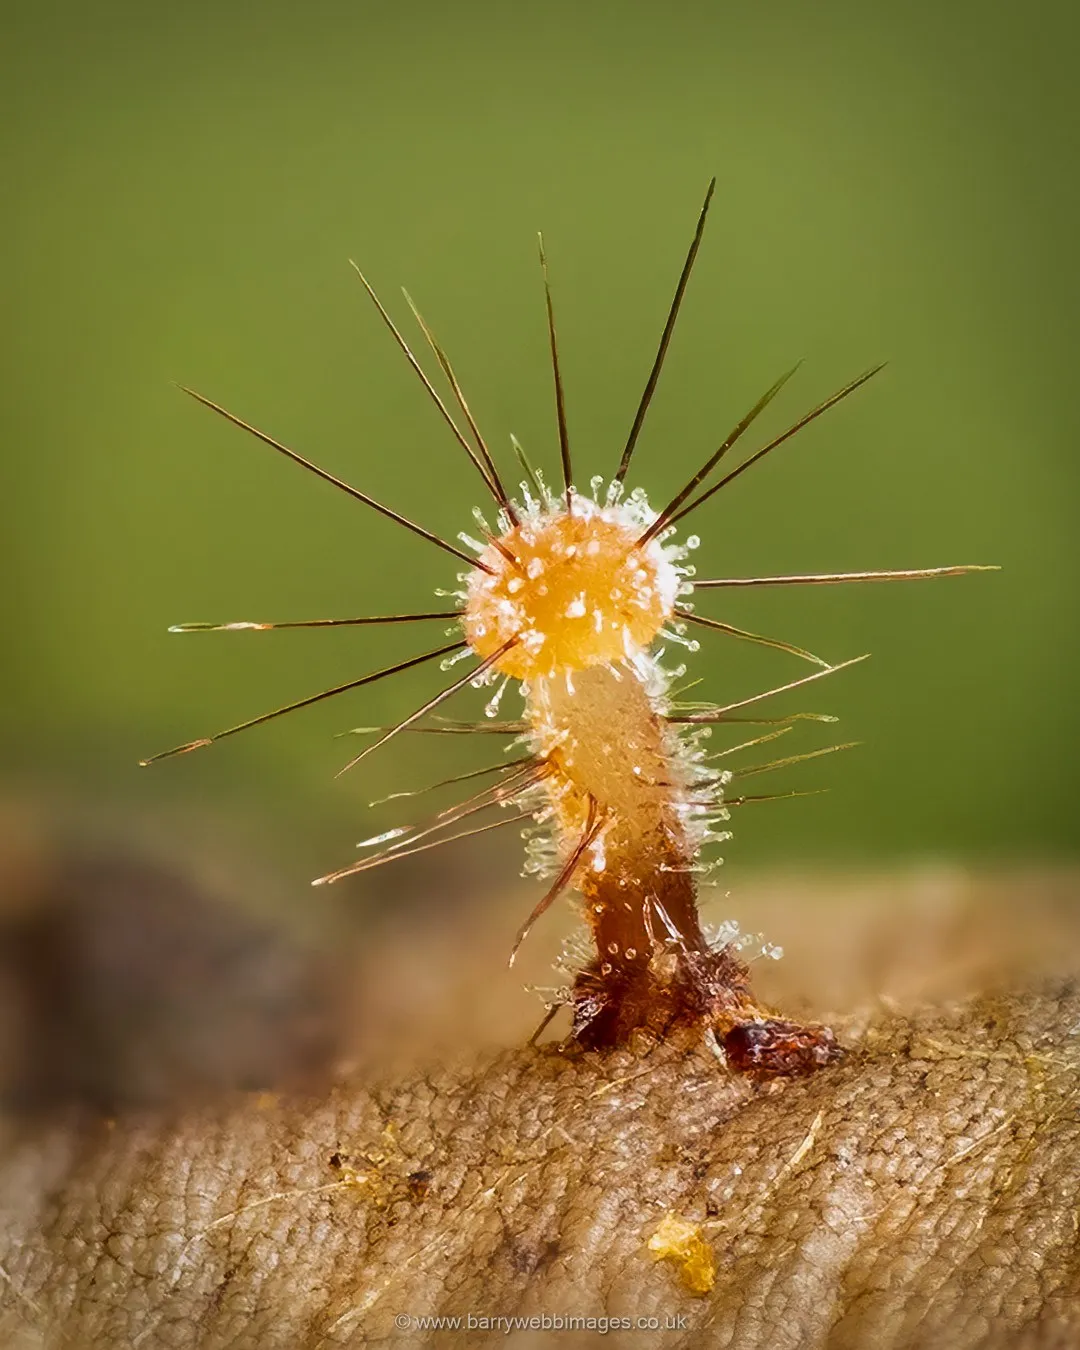 The Lush Macro Photography Of Slime Molds By Barry Webb 6